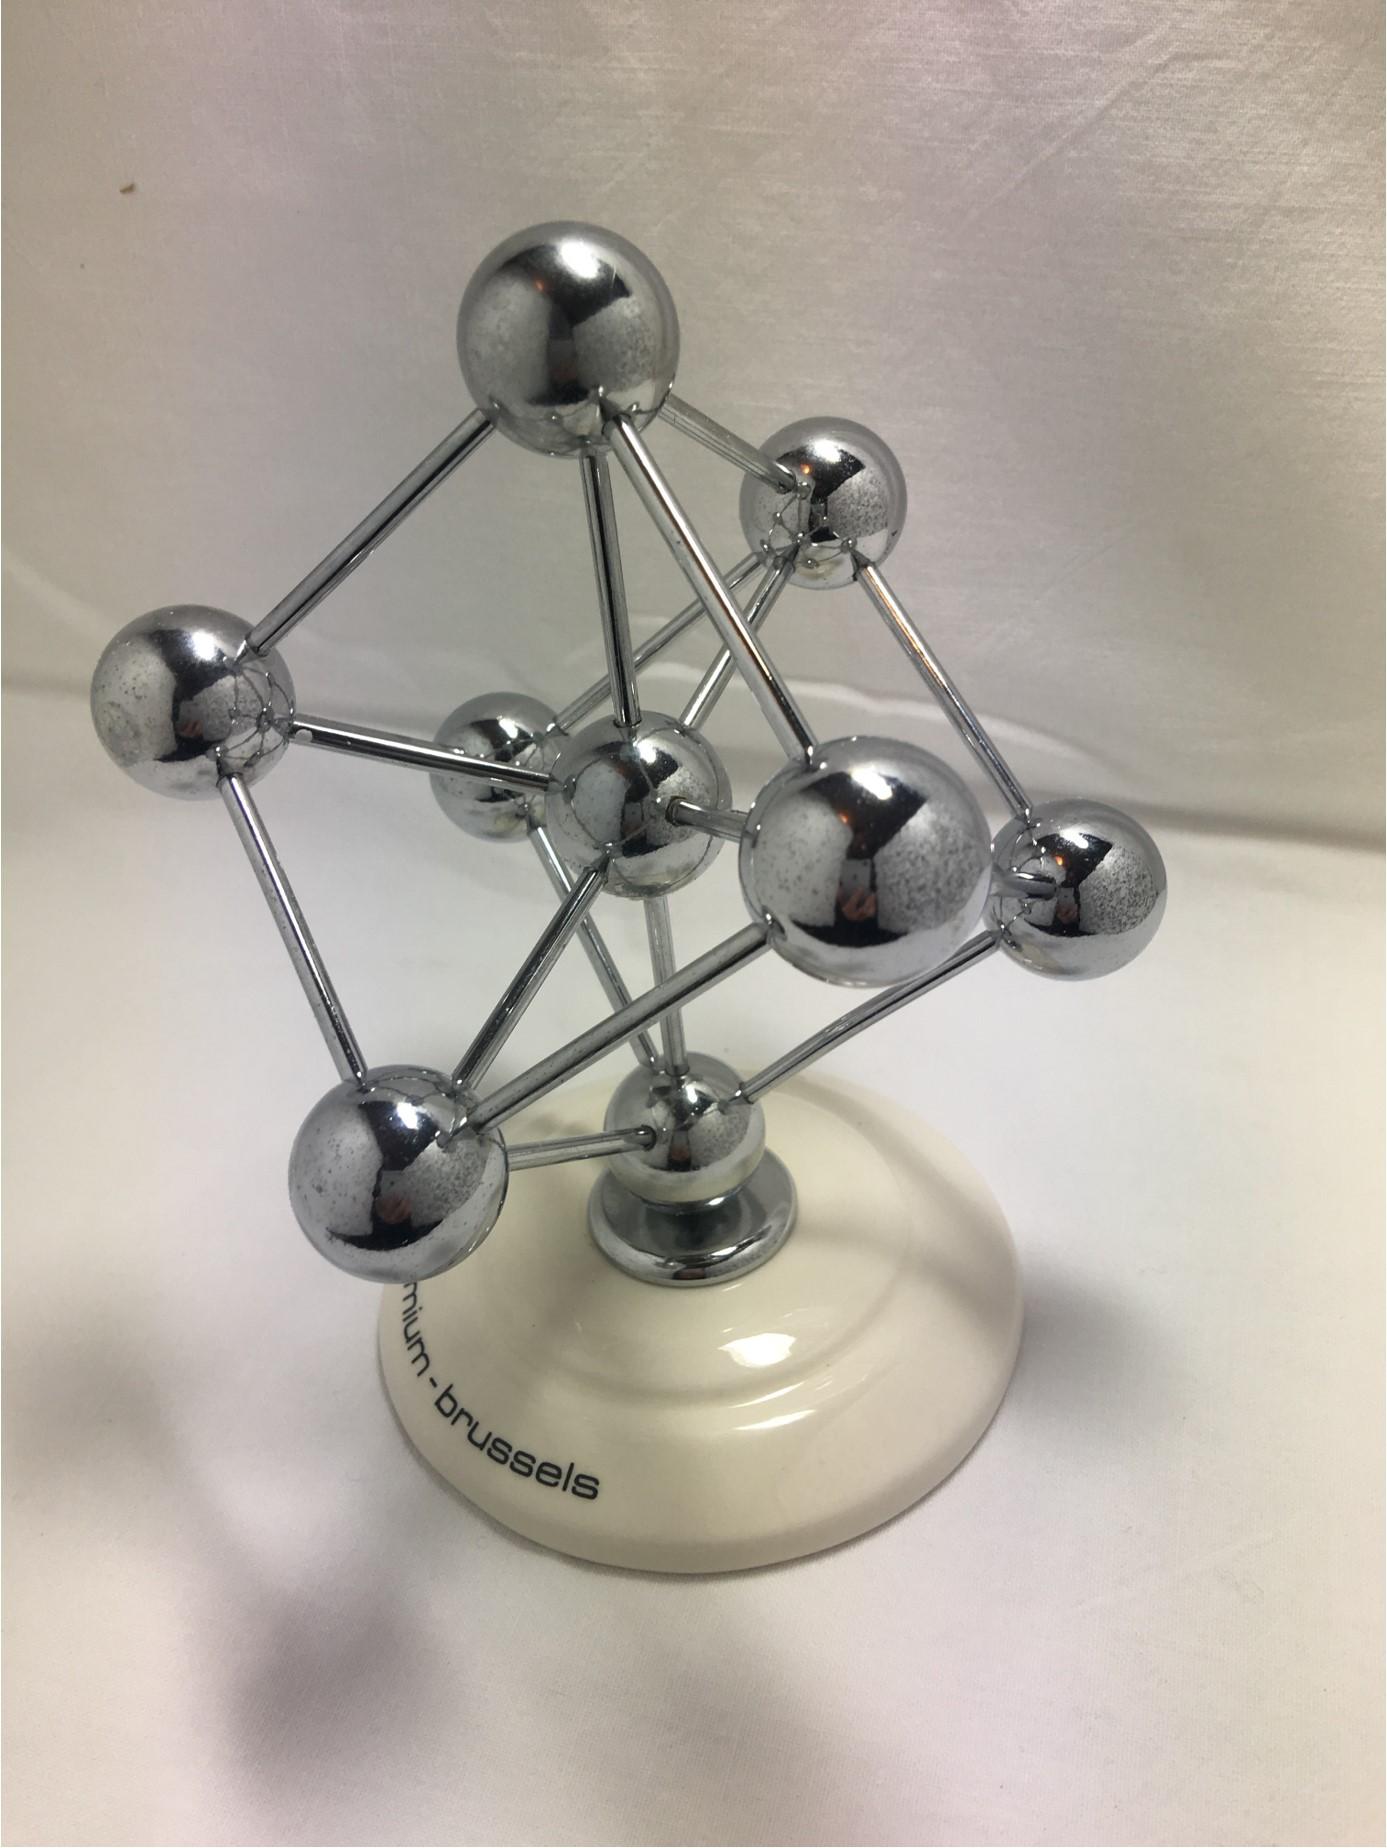 A lovely desk decoration from Brussels. The Atomium was built as the main pavilion and icon of the 1958 World's Fair of Brussels (Expo 58). In the 1950's, faith in scientific progress was great, and a structure depicting atoms was chosen to embody